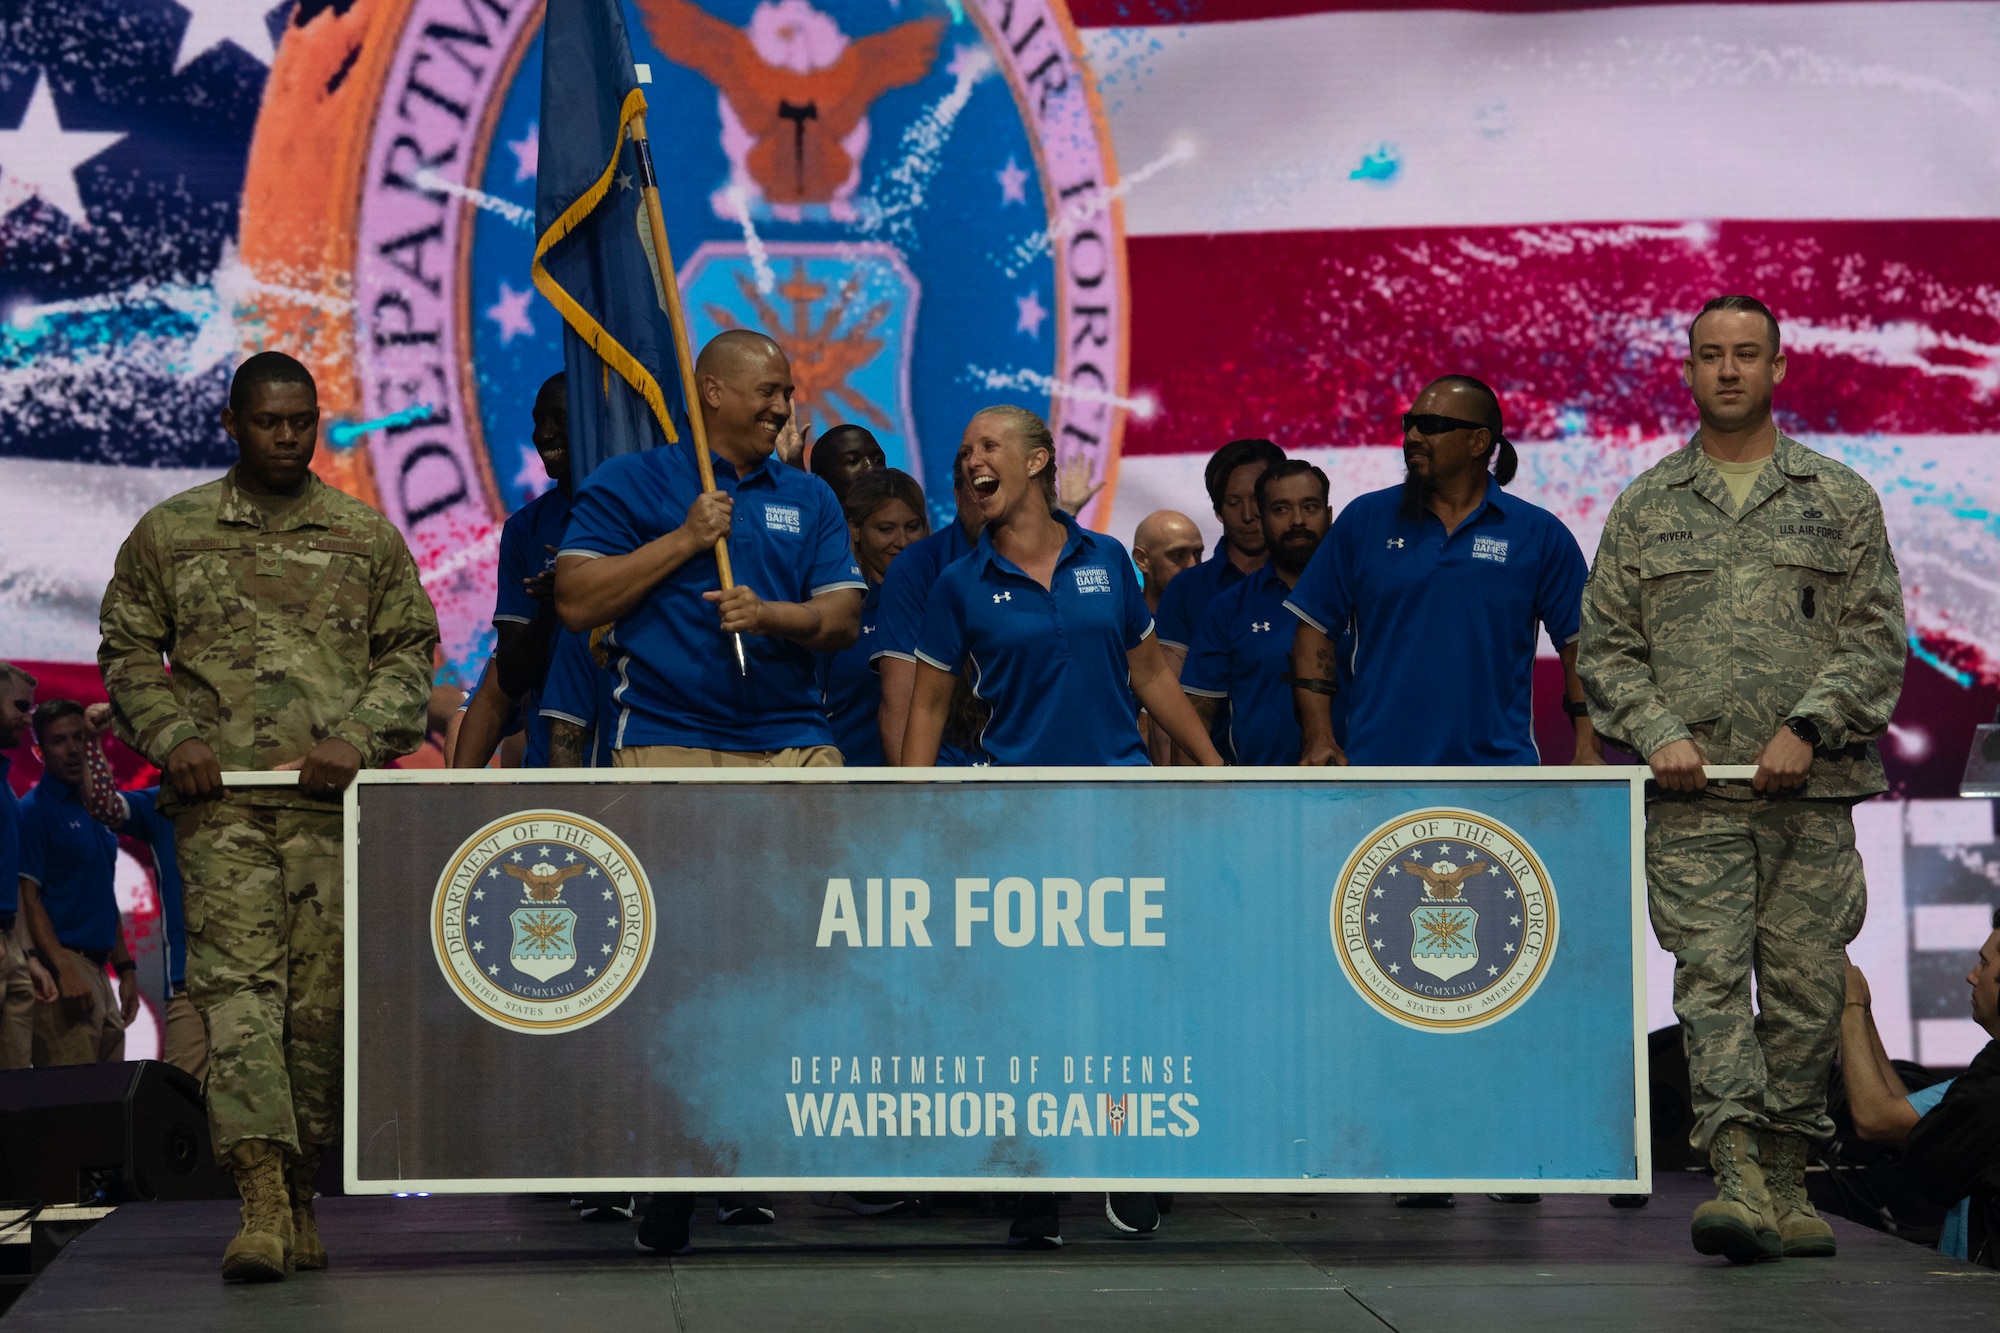 Air Force athletes enter the arena for the opening ceremony of the Department of Defense Warrior Games in Tampa Bay, Fla., June 22, 2019. (DoD photo by Lisa Ferdinando)